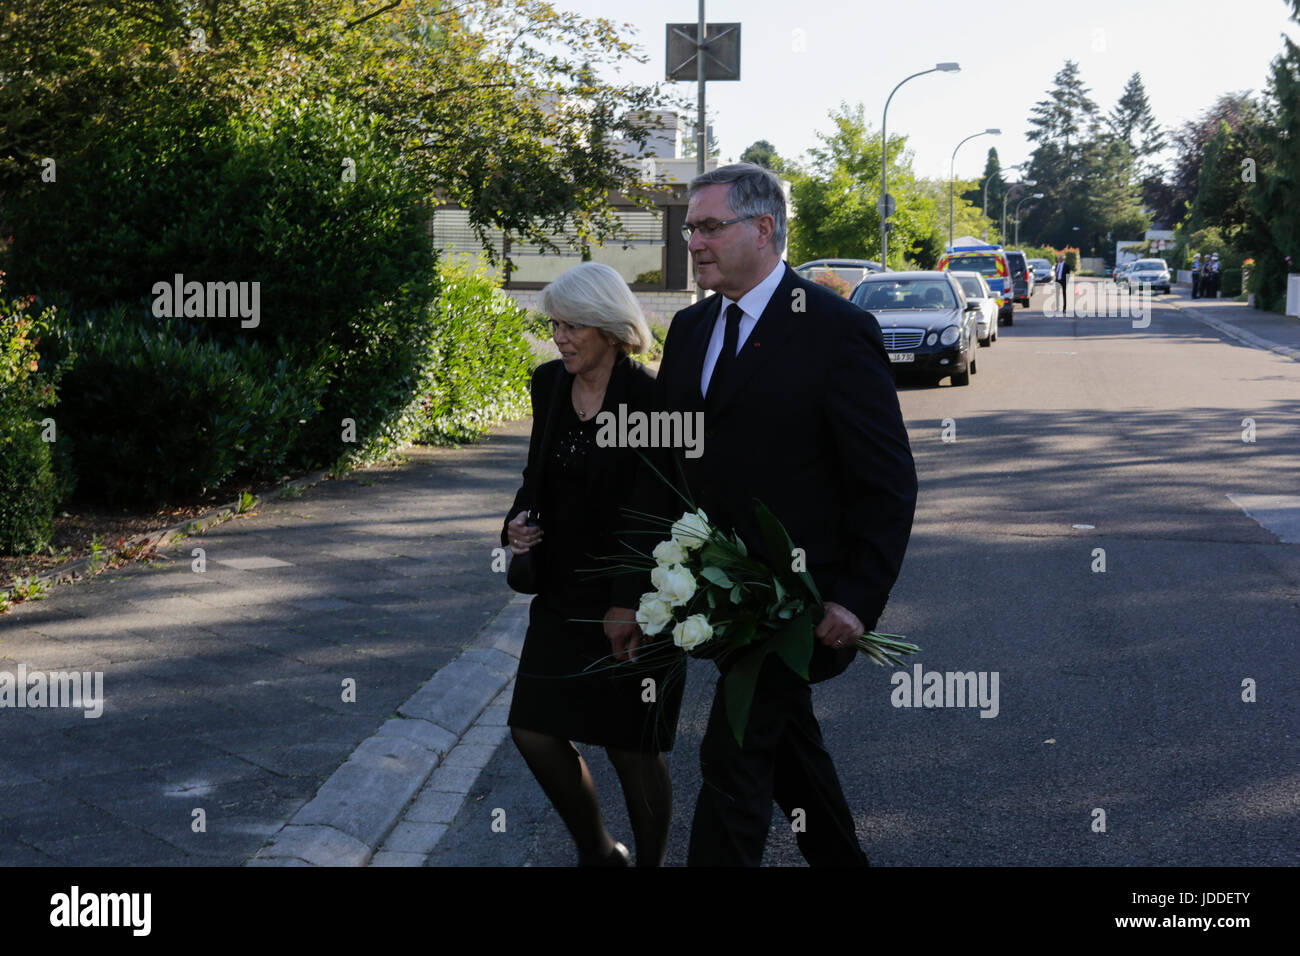 Oggersheim, Germany. 19th June 2017. Former German Defence Minister Franz Josef Jung and his wife Gabriella arrive at the former residence of Helmut Kohl. Long term political companion Theo Waigel, who served as German Minister of Finance under Helmut Kohl, came to pay his respects to his widow 3 days after the death of the former German Chancellor in his home in Oggersheim. Credit: Michael Debets/Alamy Live News Stock Photo